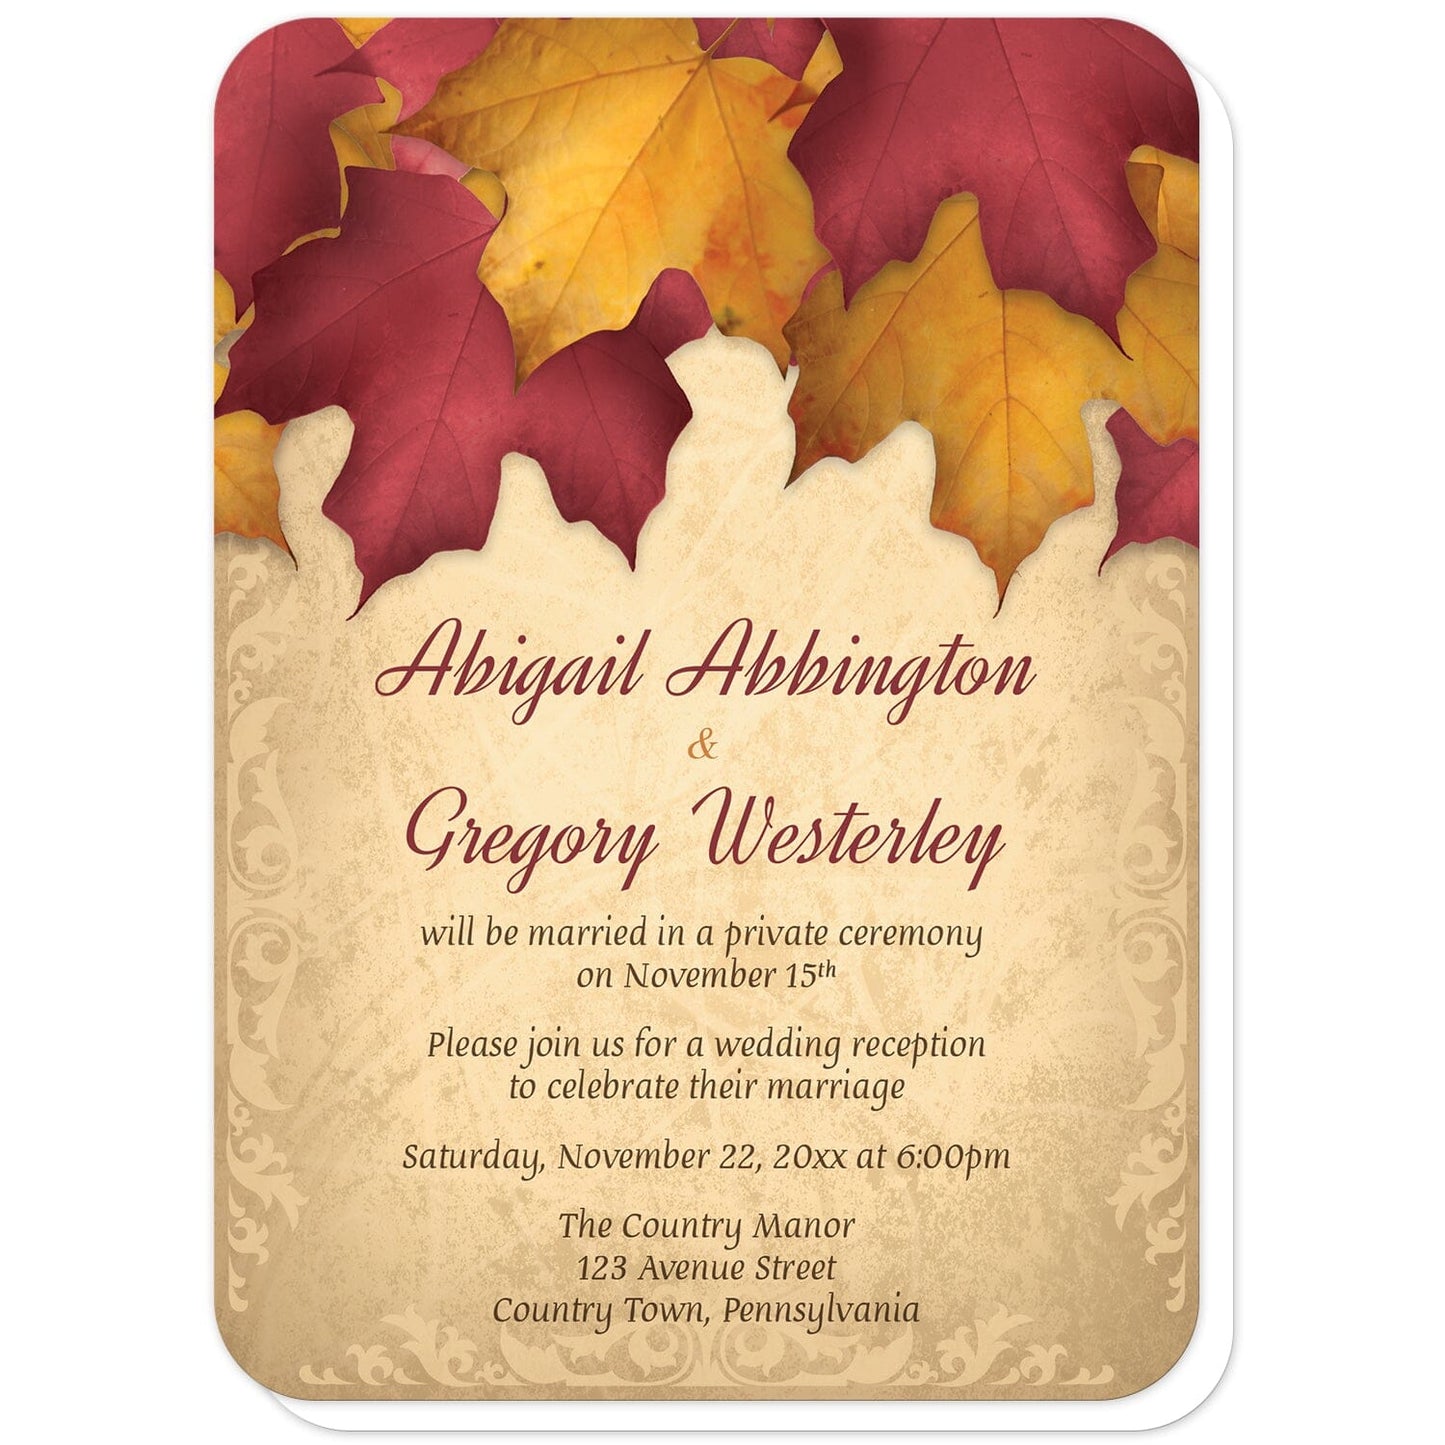 Rustic Burgundy Gold Autumn Reception Only Invitations (with rounded corners) at Artistically Invited. Rustic burgundy gold autumn reception only invitations with an arrangement of burgundy and gold fall leaves along the top over a beautiful gold colored background with elegant flourishes along the edges. Your personalized post-wedding reception details are custom printed in burgundy and brown over the gold background.